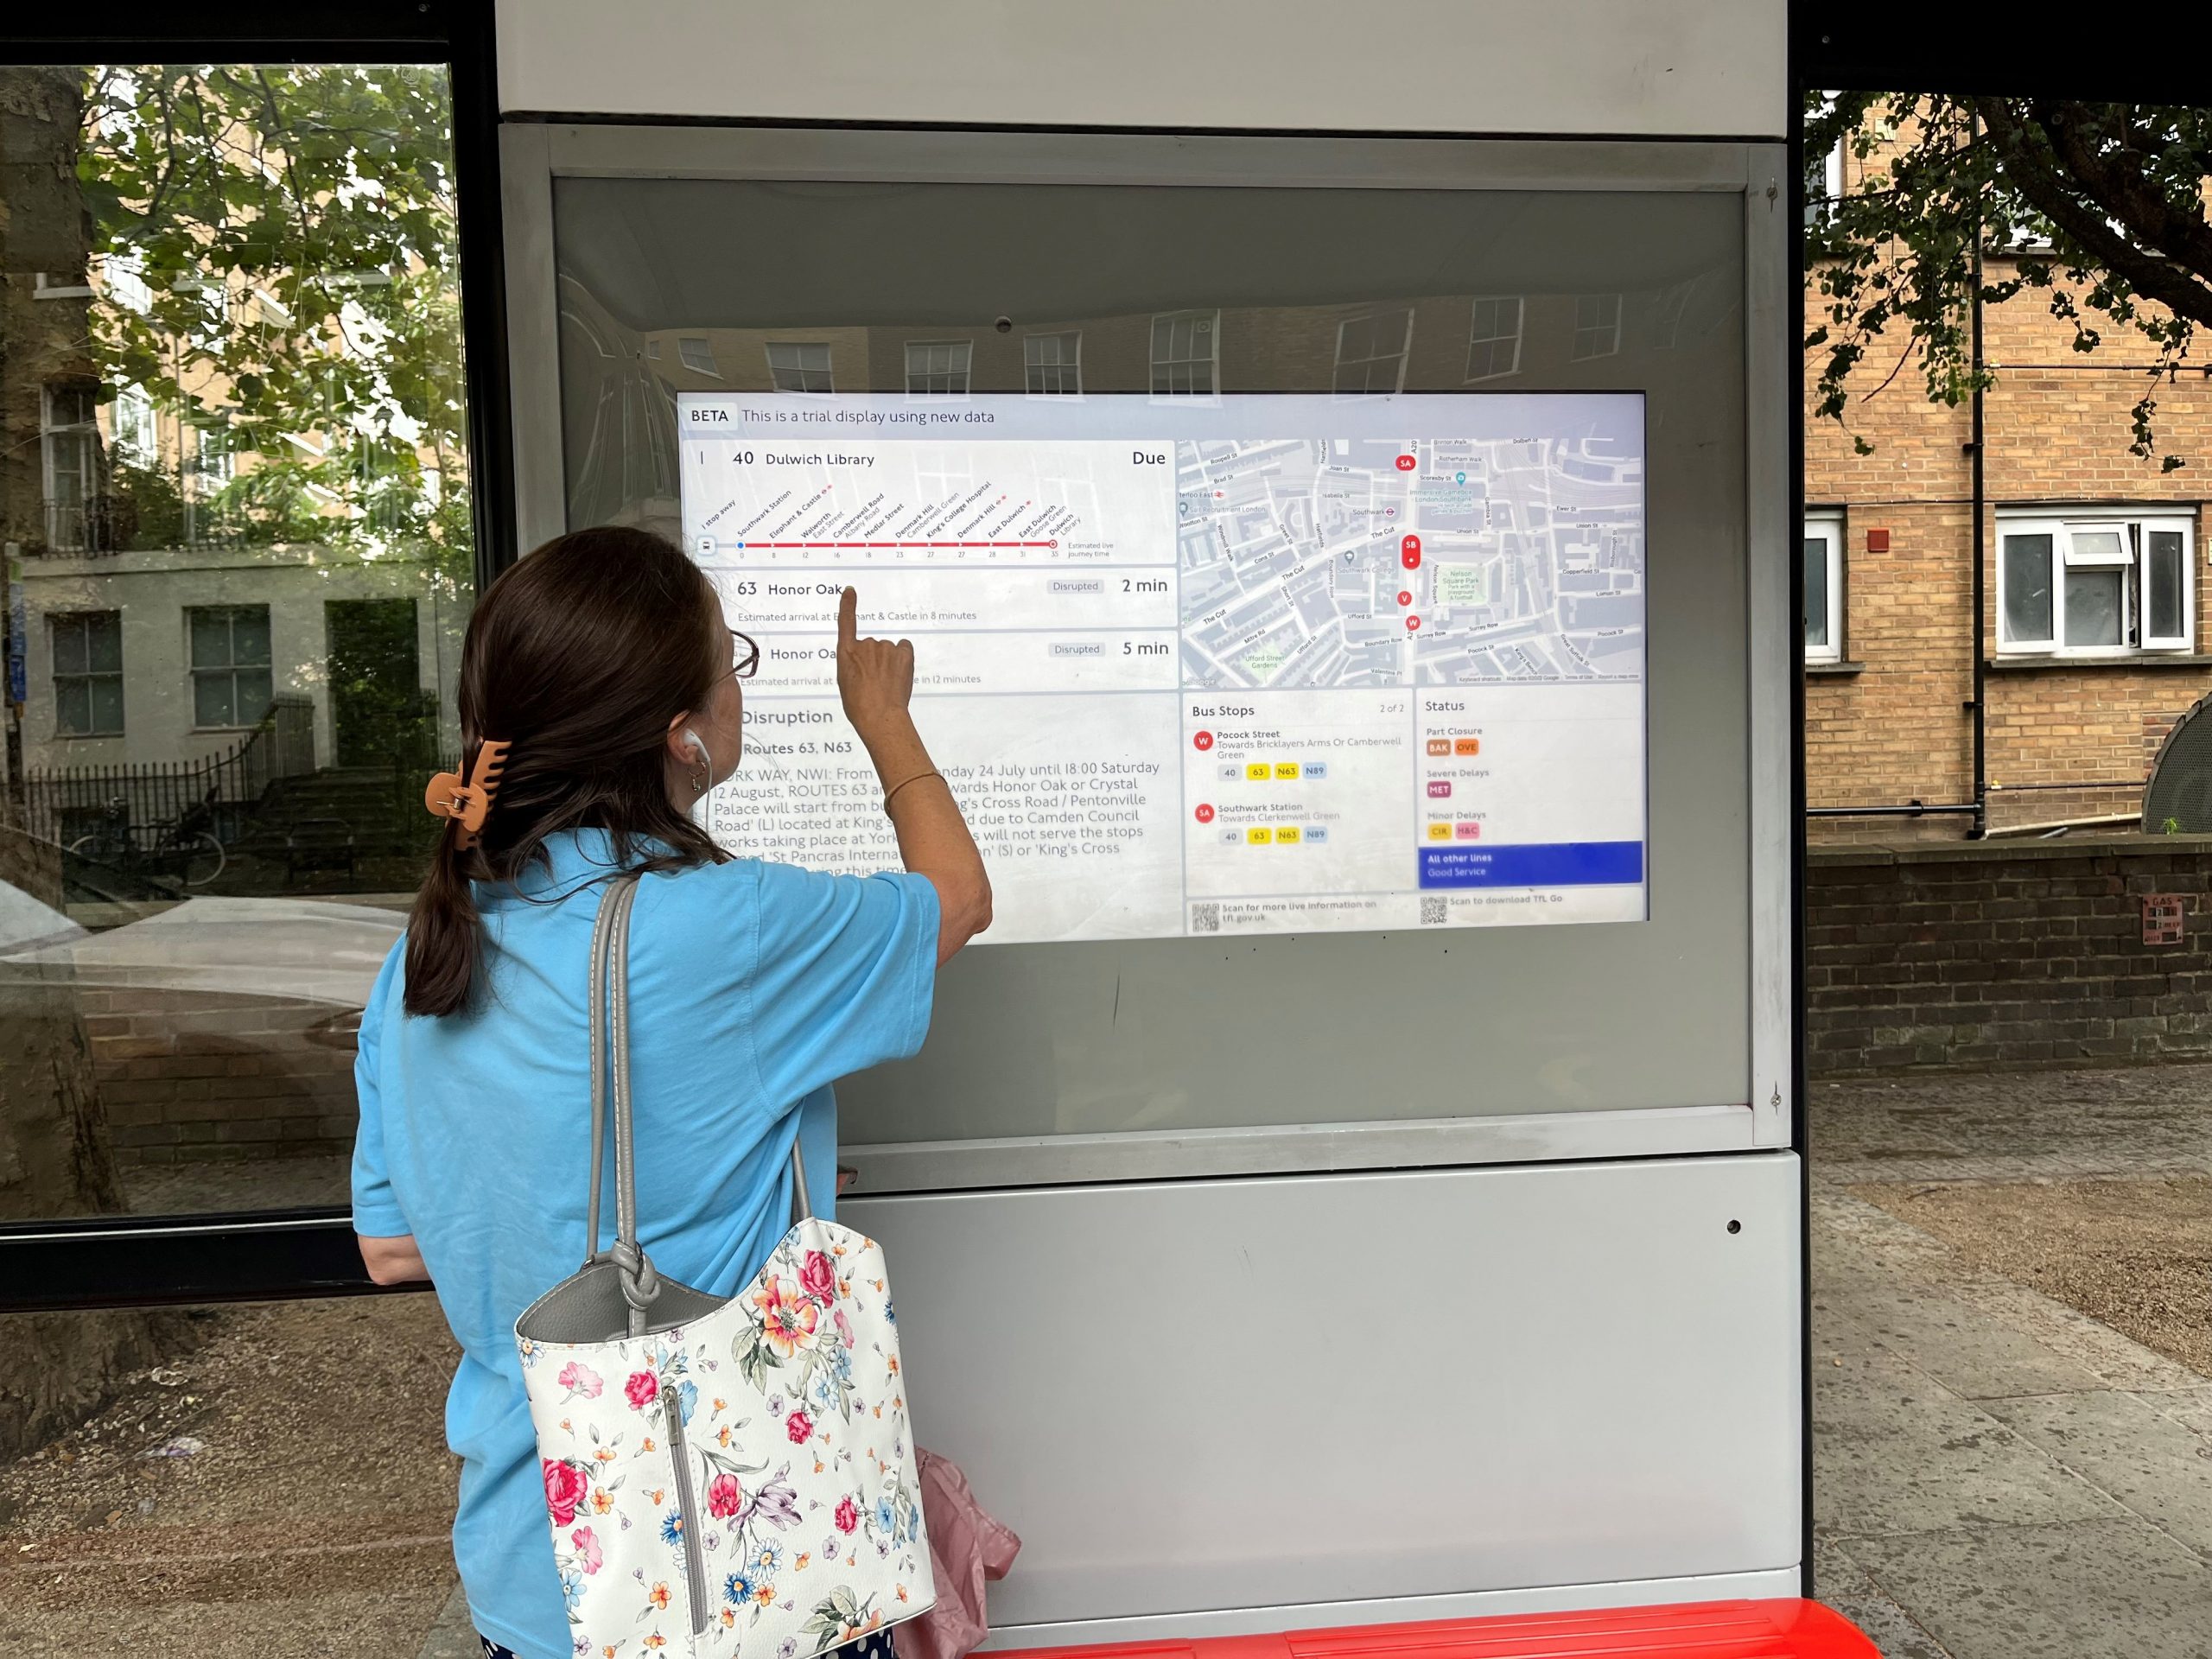 South west London SLC member, Vicky, standing at a bus stop, with a trial digital display. Vicky is standing with her back to the camera, pointing at the display.